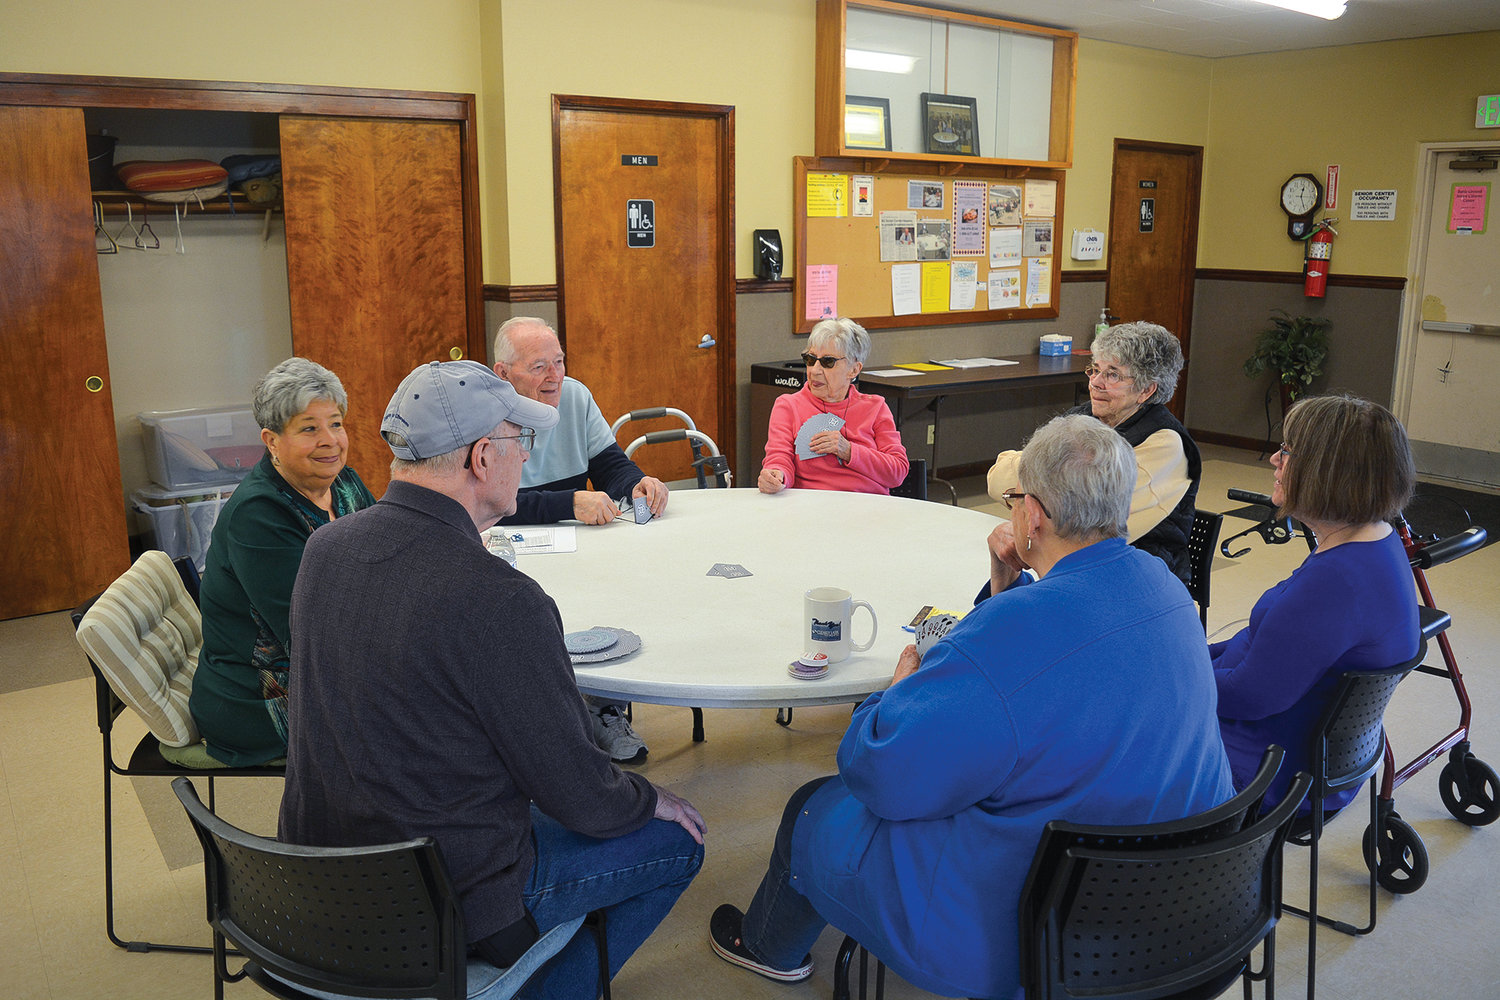 Pinochle club continues tradition at Battle Ground Senior Center The